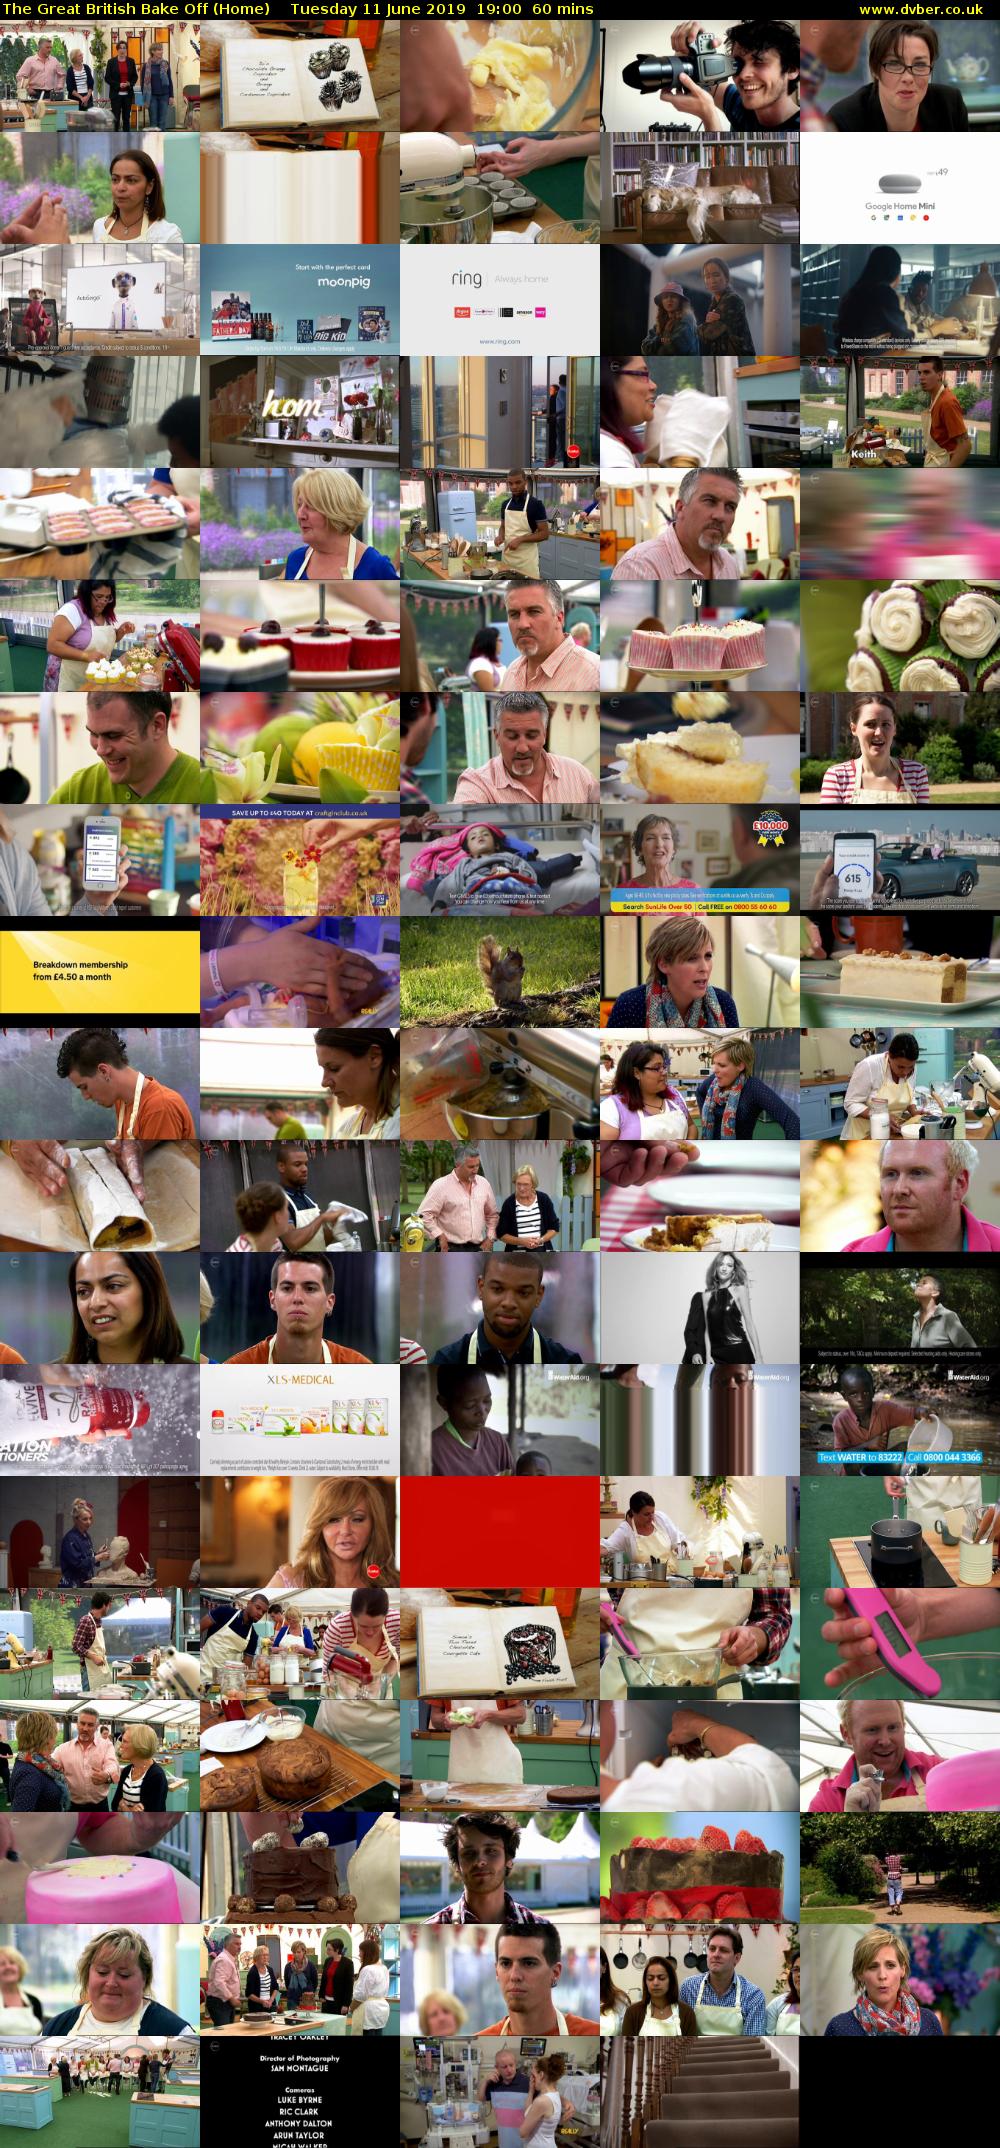 The Great British Bake Off (Home) Tuesday 11 June 2019 19:00 - 20:00